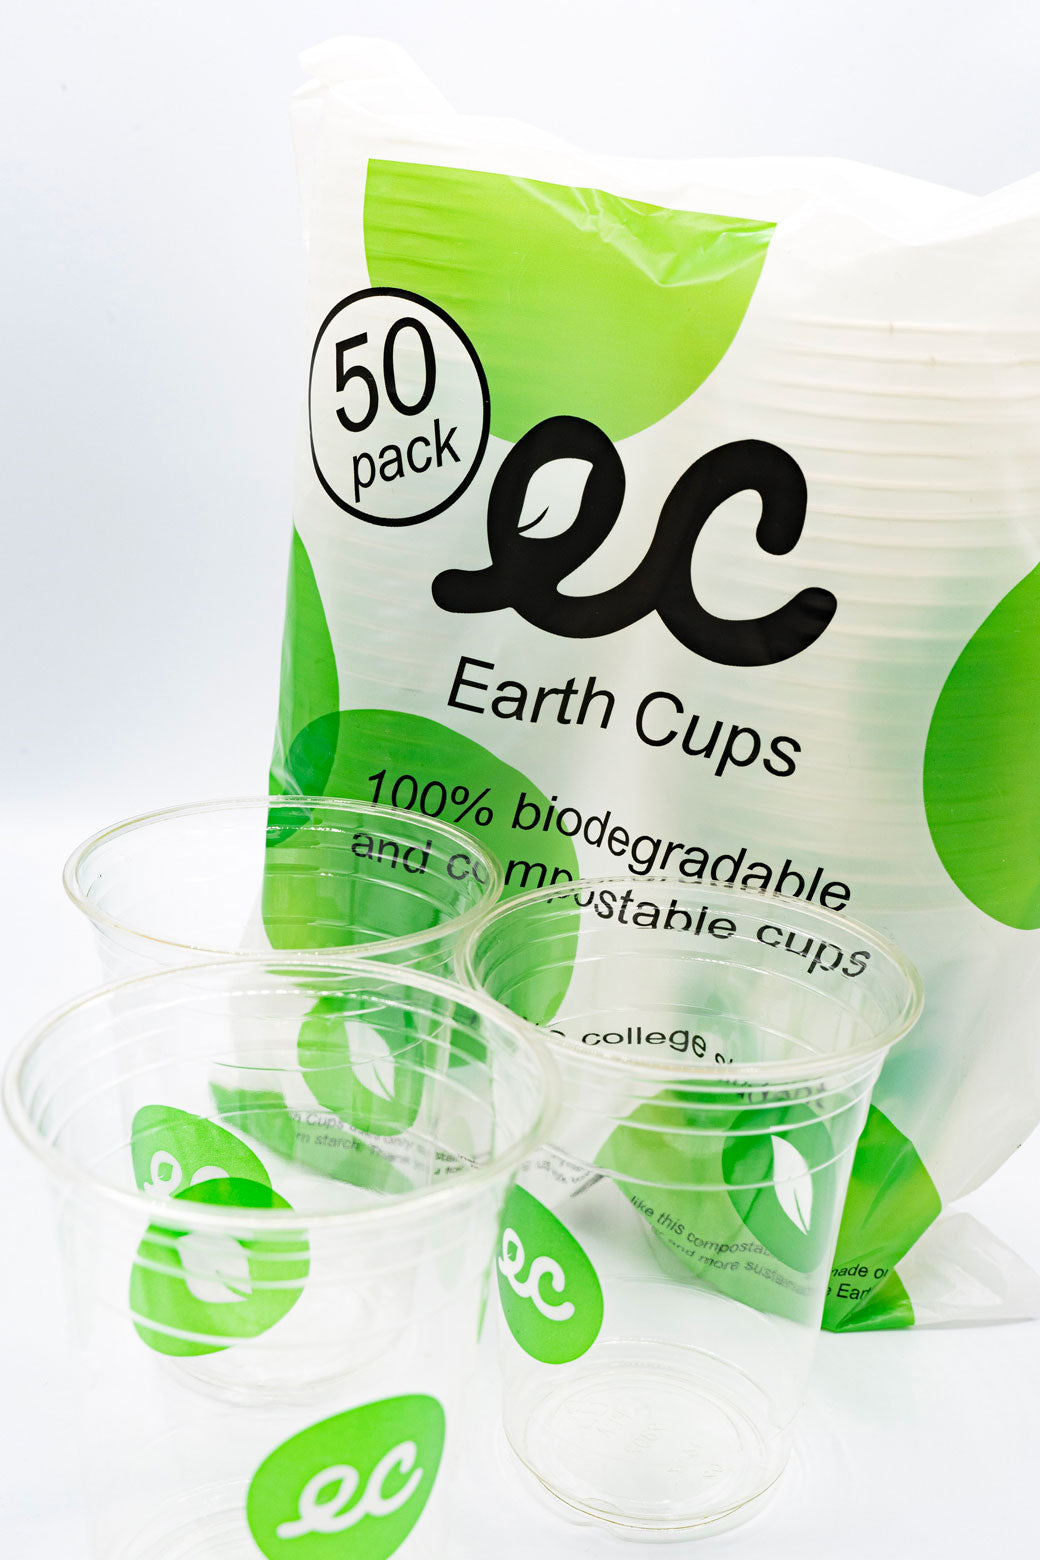 Earth Cups Green Compostable Cups 50 Pack